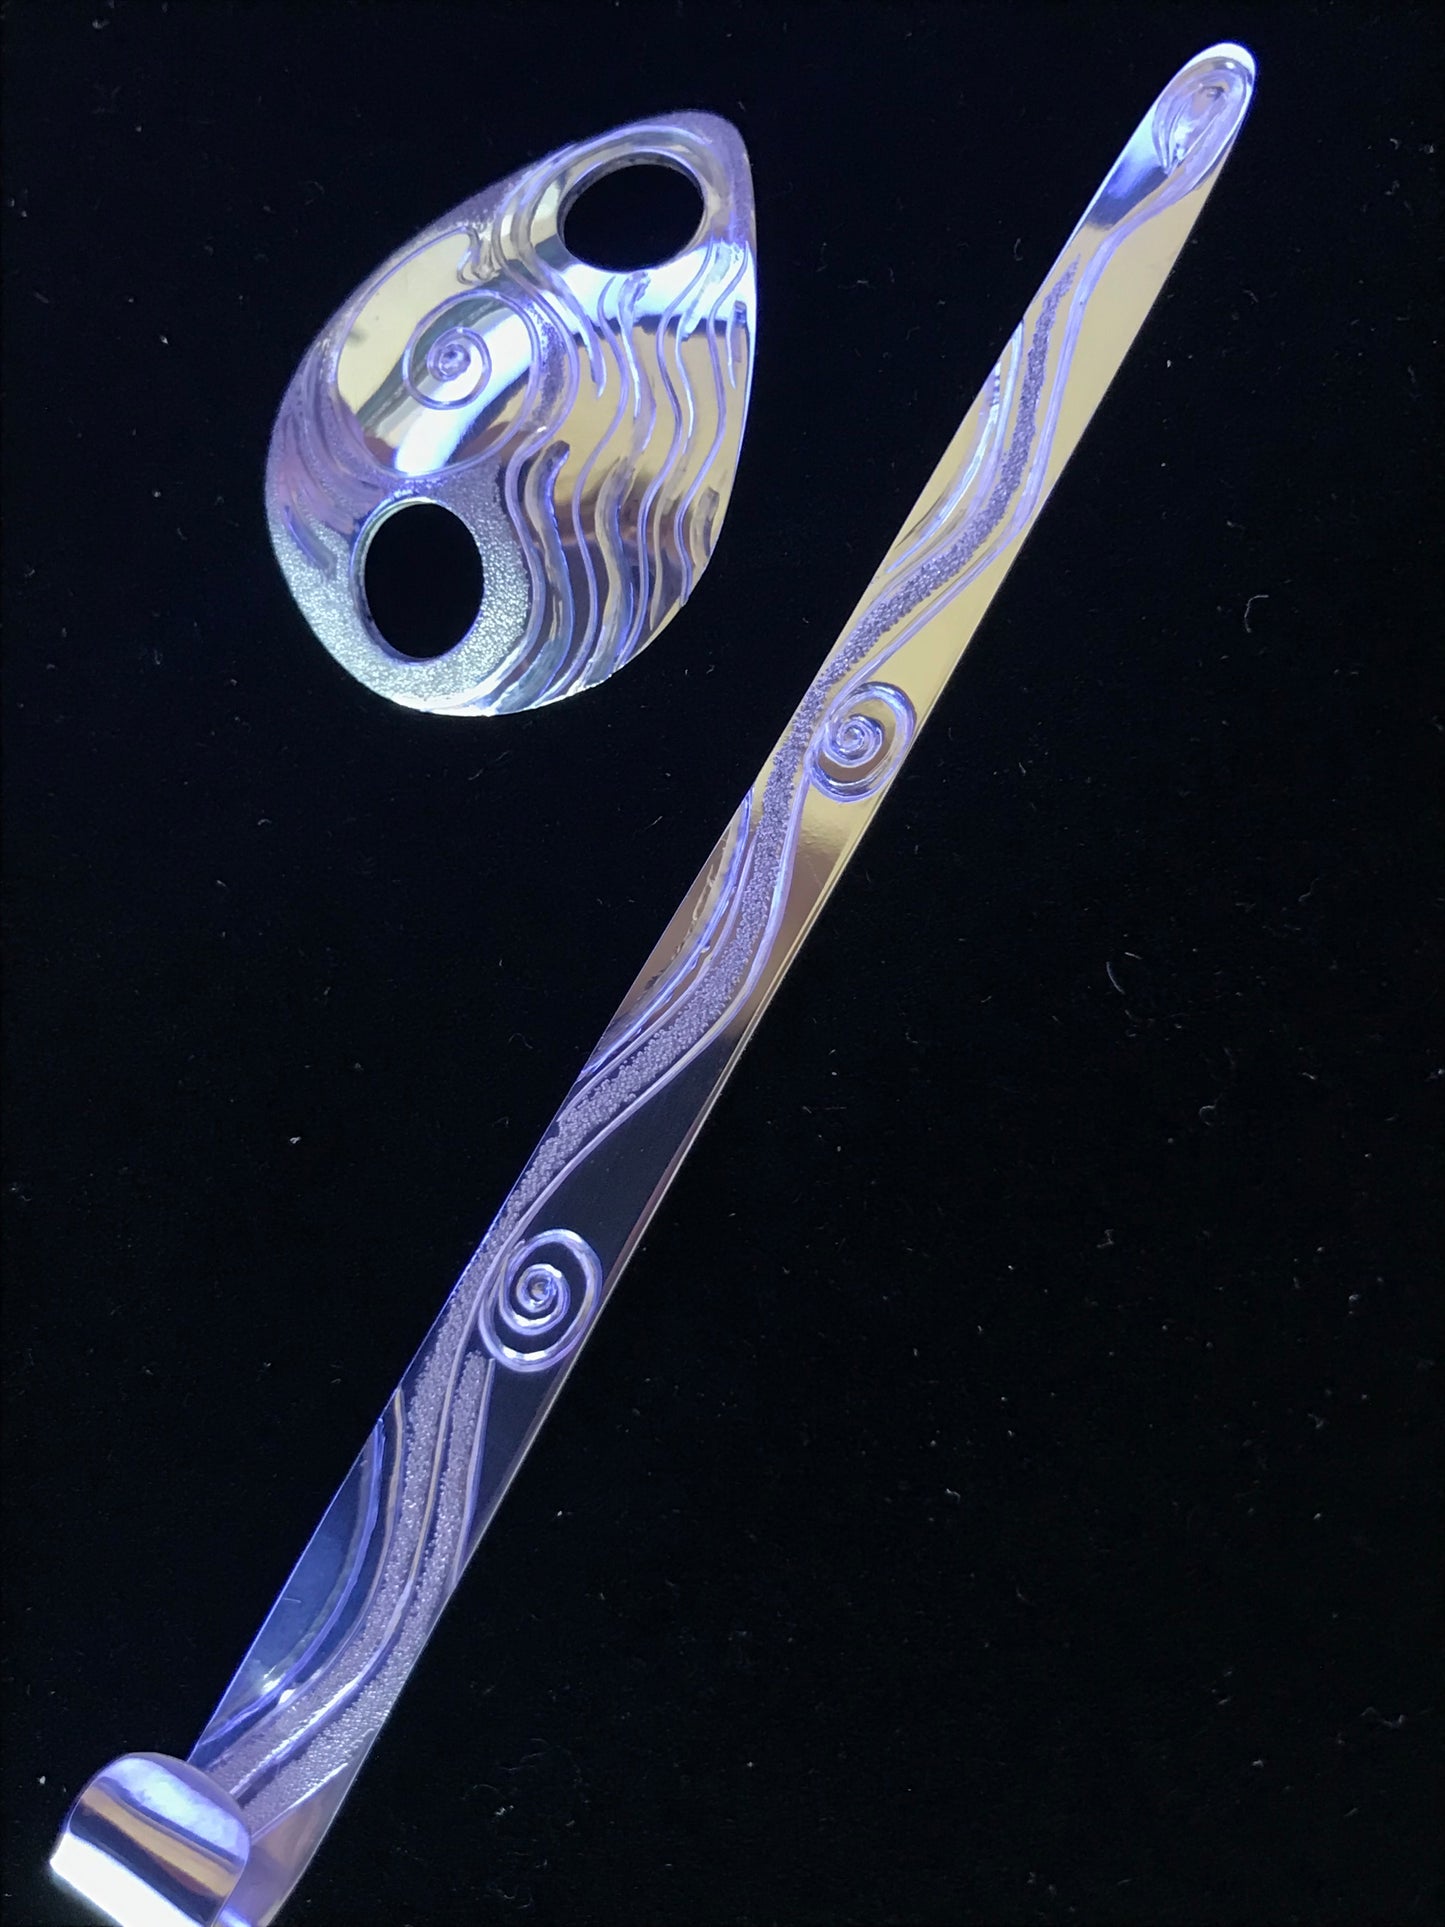 Moon Snail sterling silver hairpiece for ornamental wear in hair designed and engraved by island artisan jeweller Laura Dutheil.